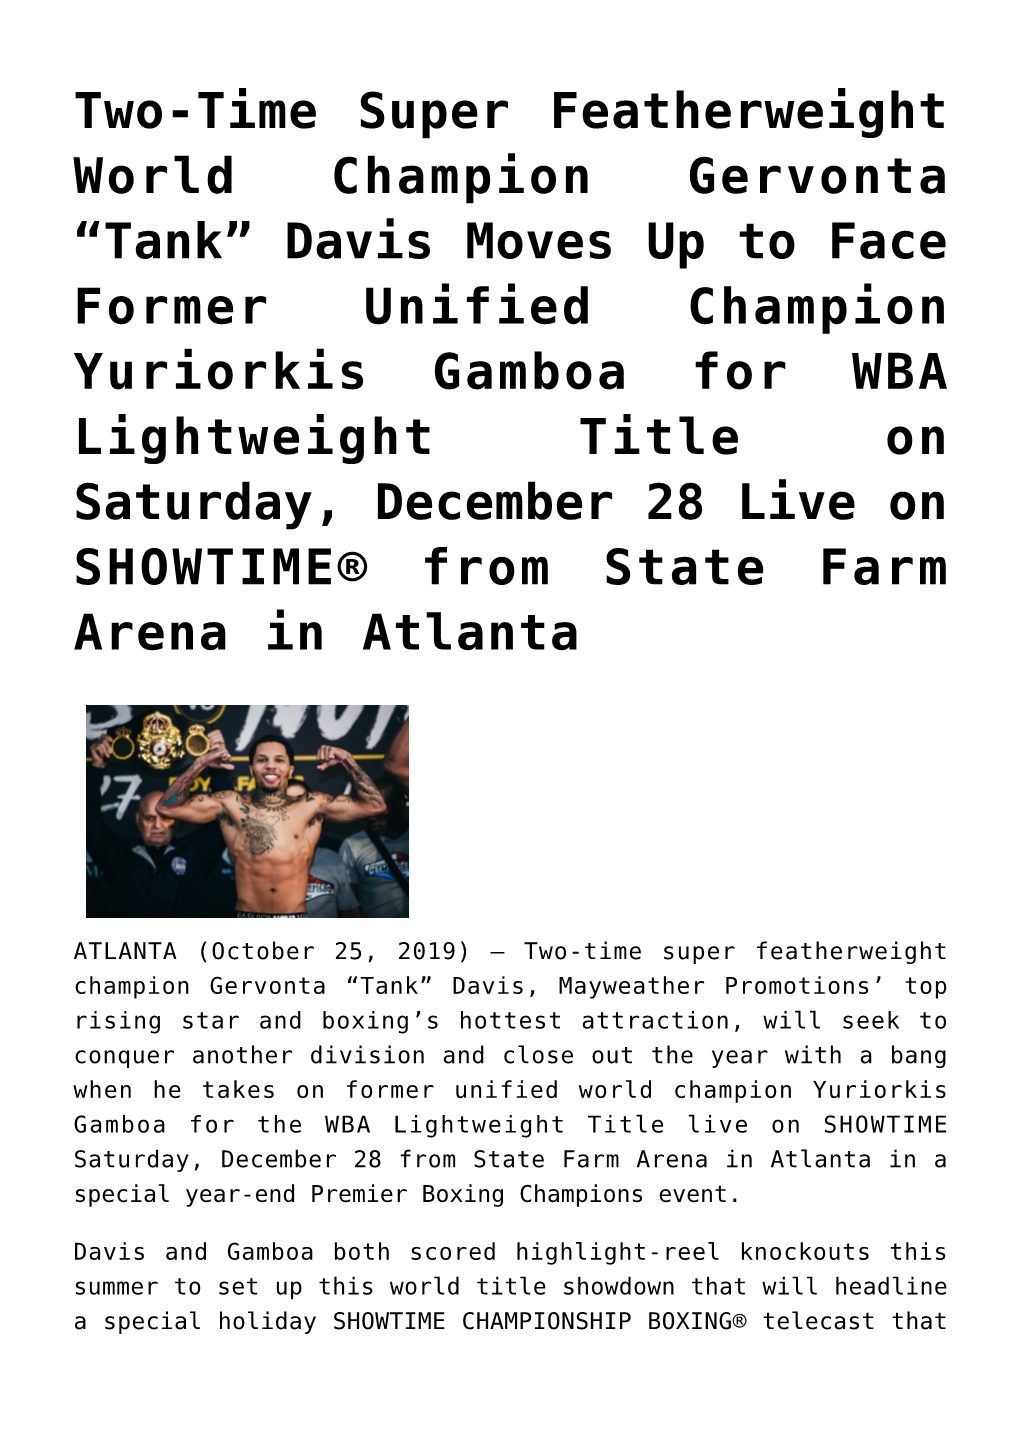 Davis Moves up to Face Former Unified Champion Yuriorkis Gamboa for WBA Lightweight Title on Saturday, December 28 Live on SHOWTIME® from State Farm Arena in Atlanta